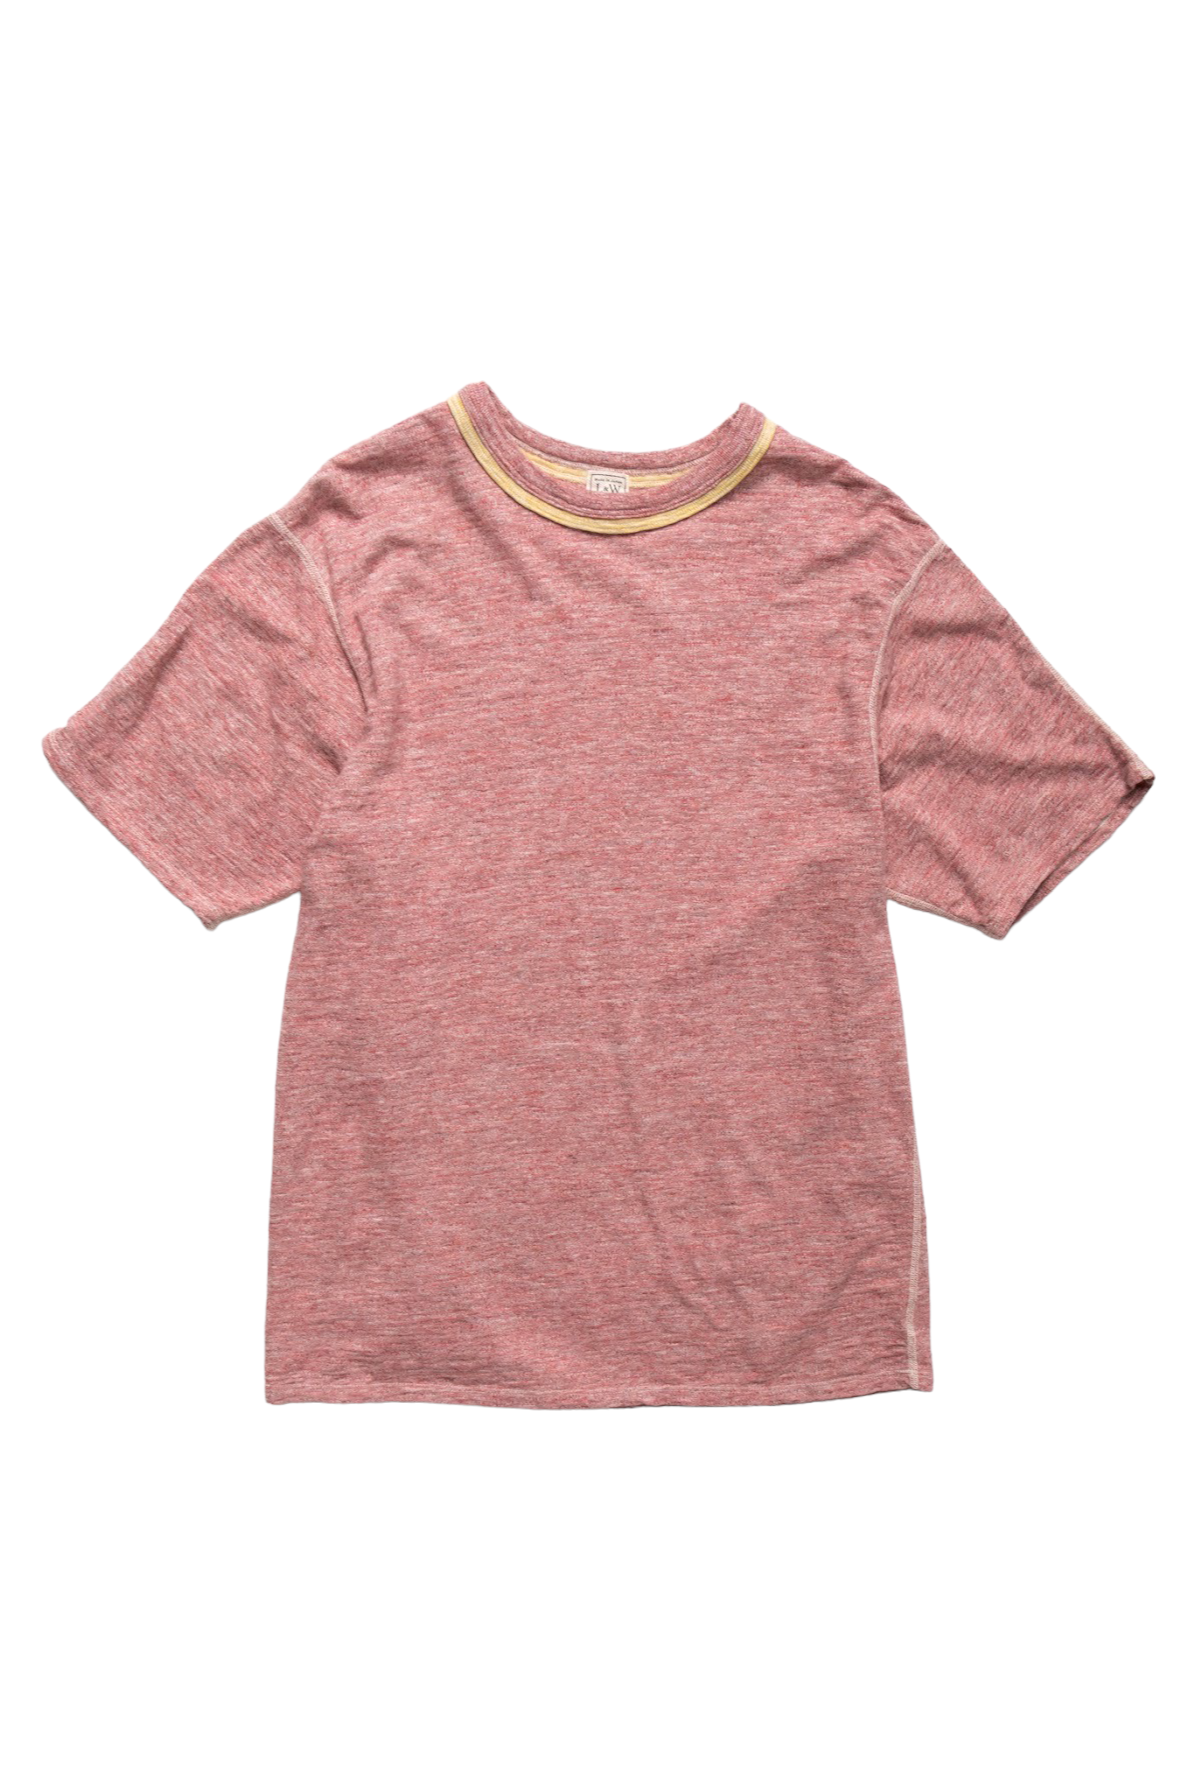 From Loop & Weft is an uneven heather slub knit. Vintage Inspired Double binder neck Set-in on the front and raglan sleeve on the back. Cotton thread stitching. Color: Red Cherry. One wash. Unisex regular fit. 100% cotton. Made in Japan